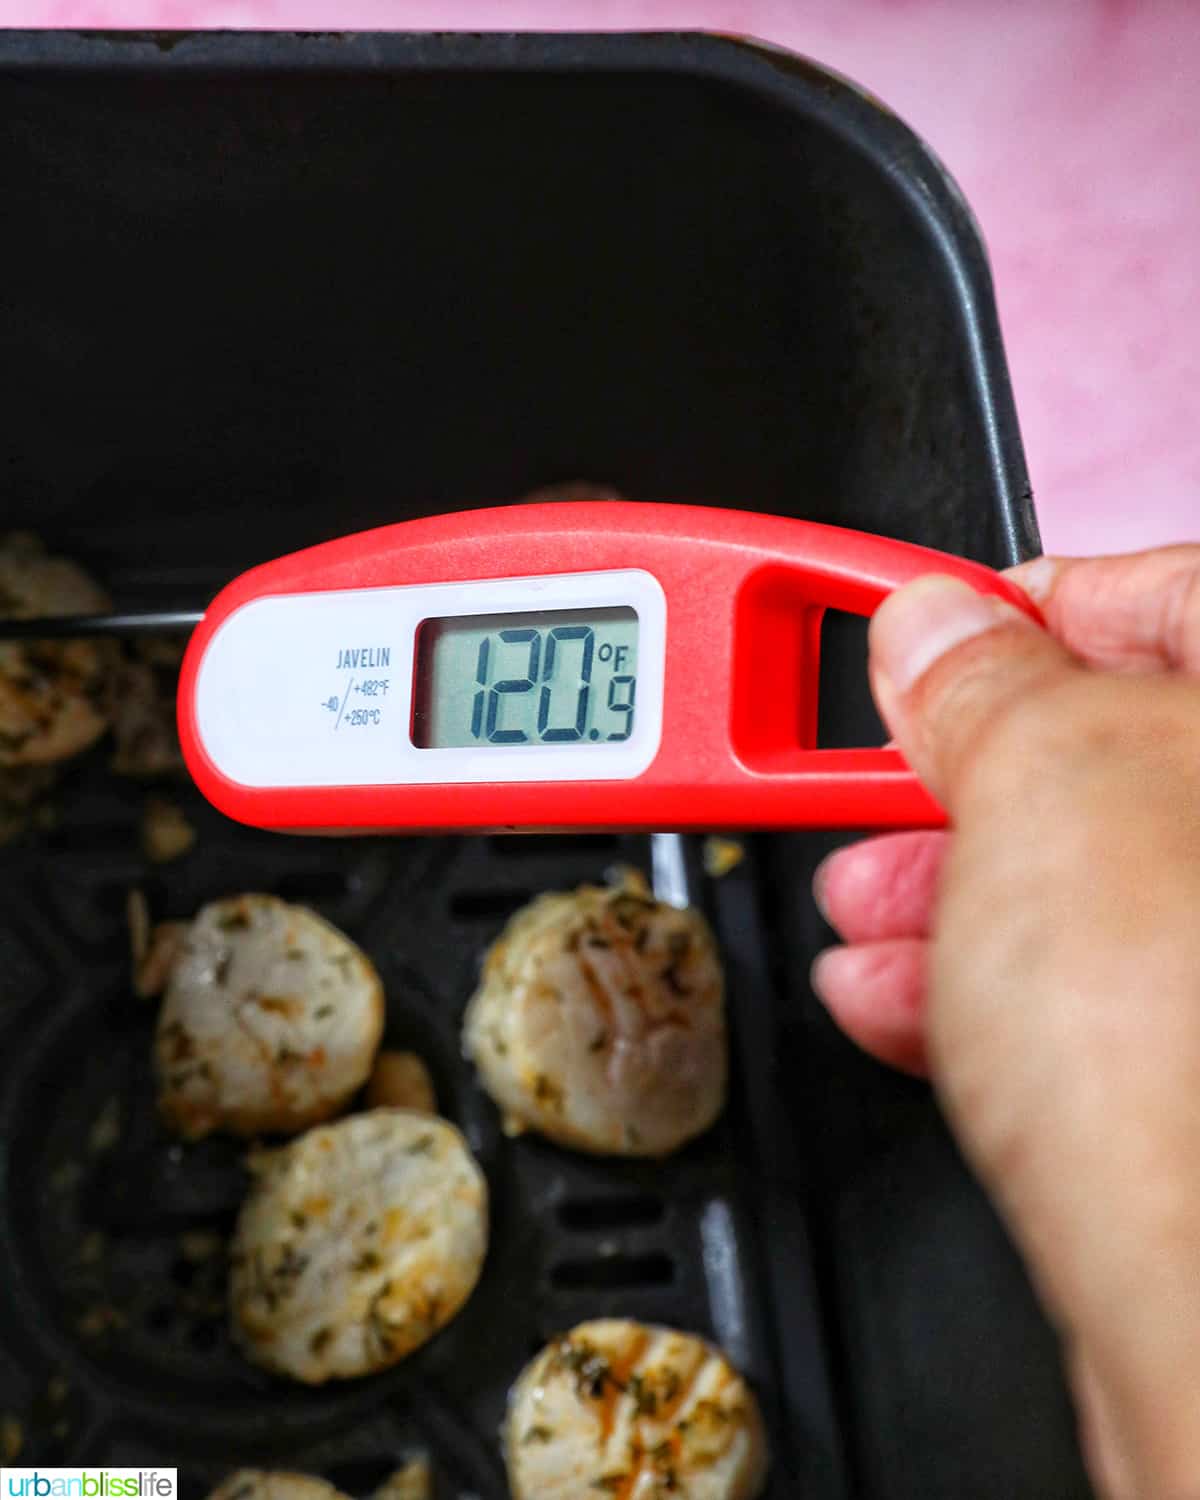 thermometer reading 120 degrees over an air fryer with cooked scallops in the basket.